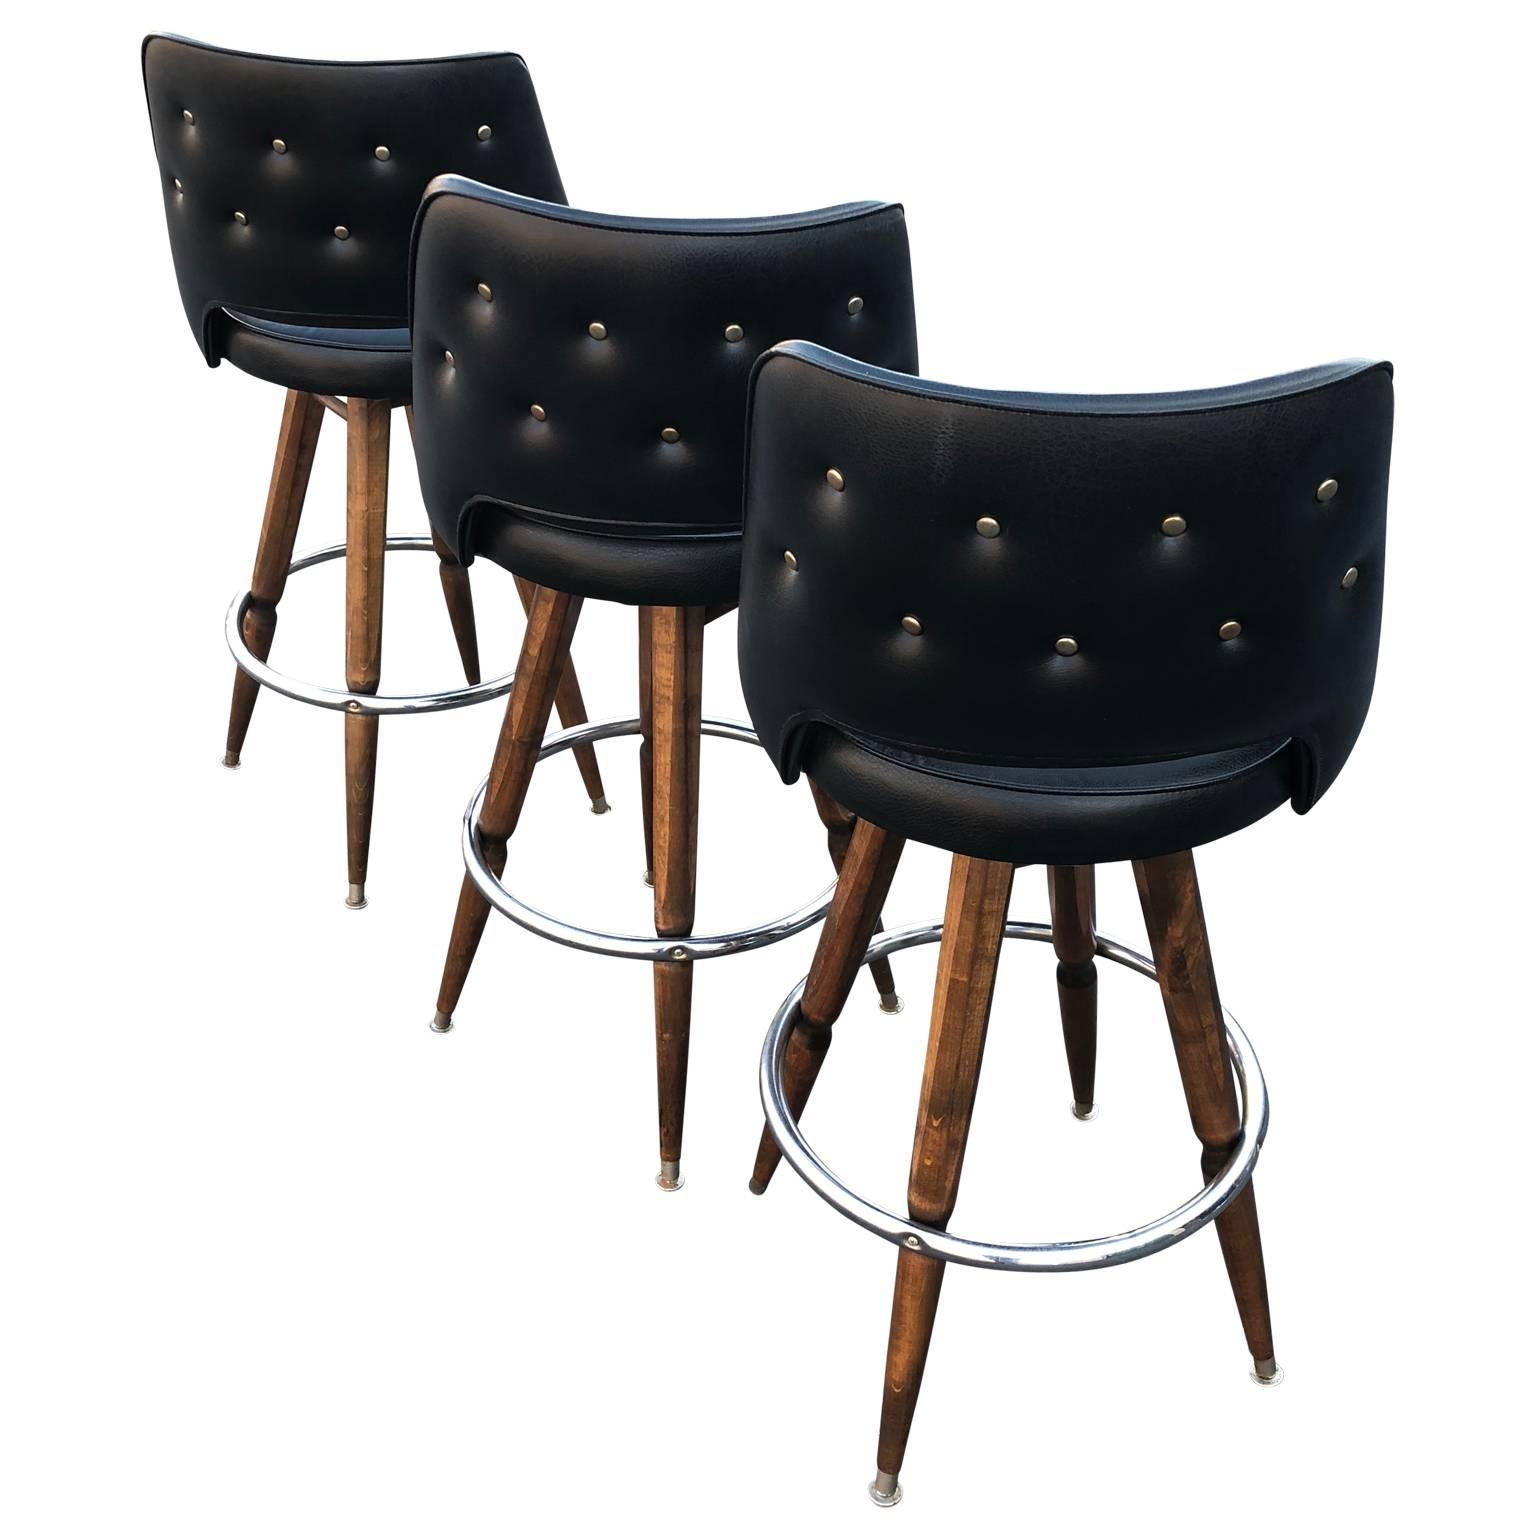 Three Black Faux-Leather Bar Stools, recently re-upholstered in vegan white fabric (faux suede).
Revised images TBD